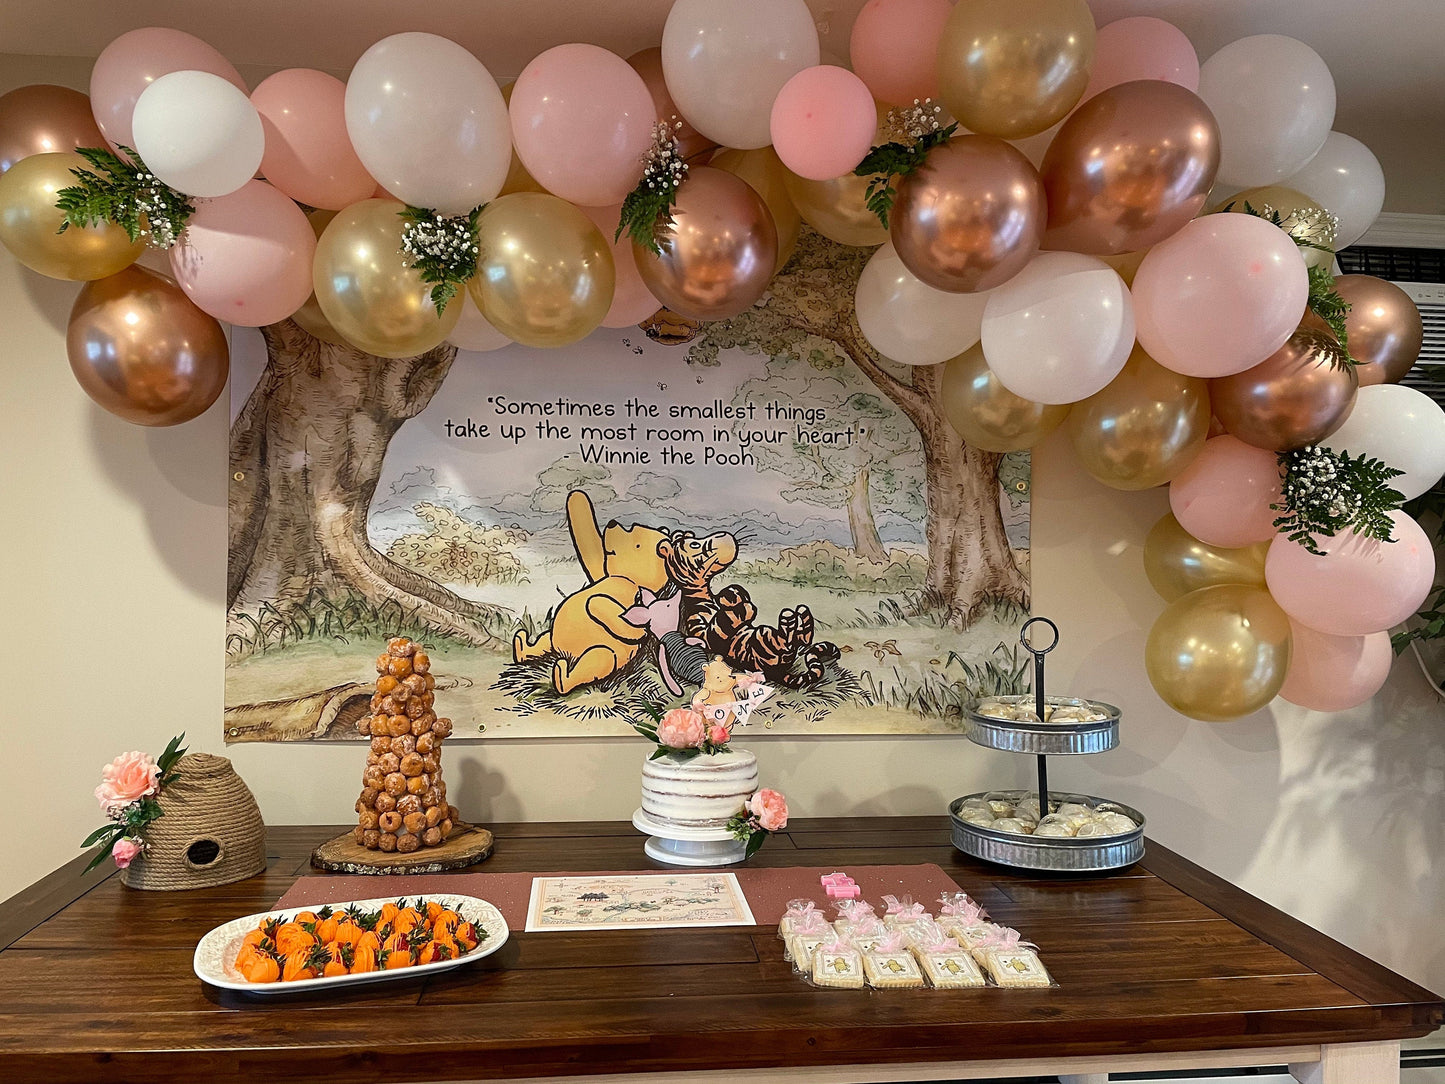 72"x48" Classic Winnie The Pooh Backdrop Background in DIGITAL FILE / Instant Download/ Sometimes the smallest things take up the most room